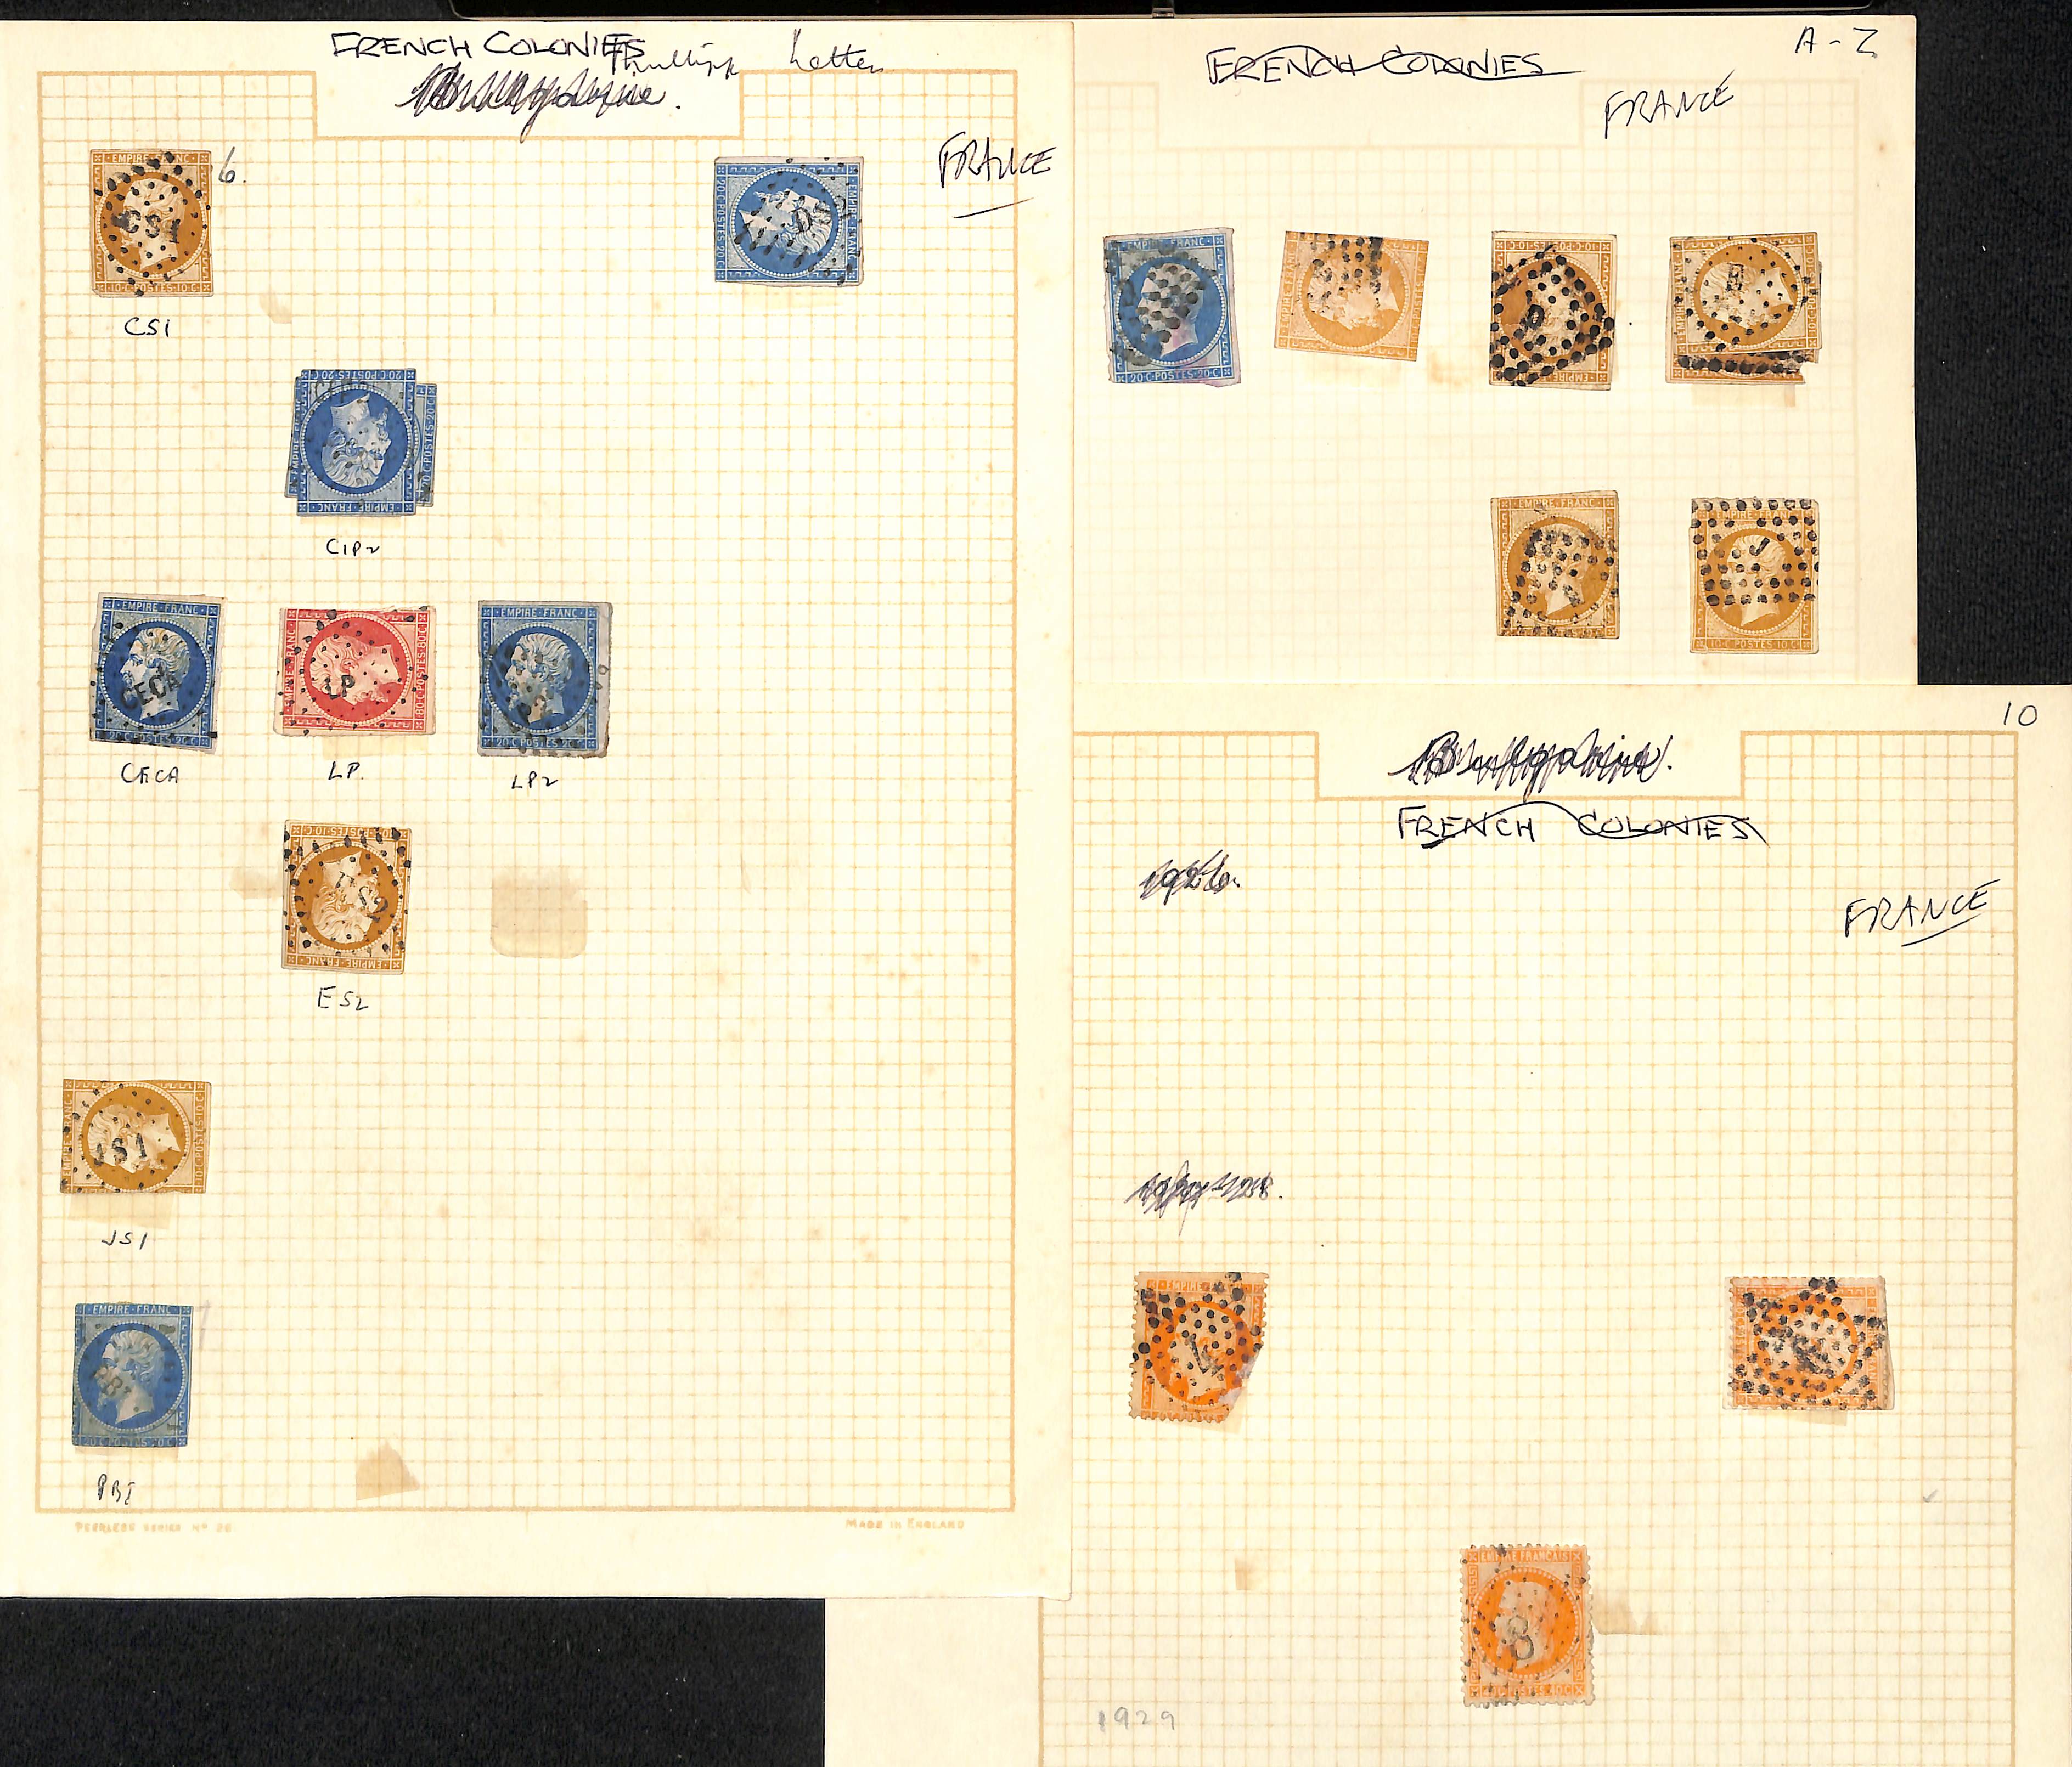 French Colonies. 1859-77 Used issues, collected for the cancellations, various lozenge and c.d.s - Image 7 of 7